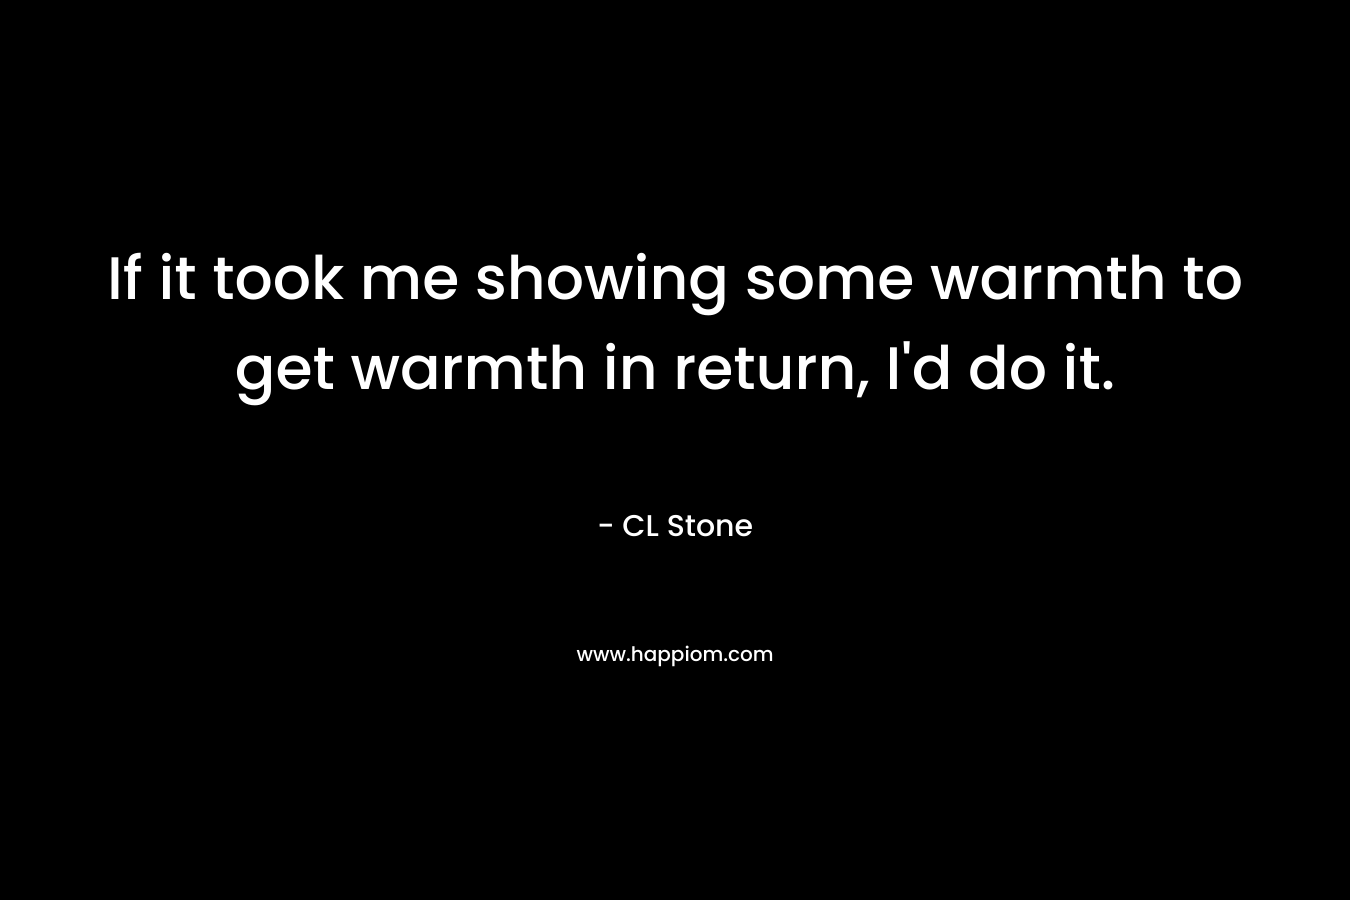 If it took me showing some warmth to get warmth in return, I'd do it.